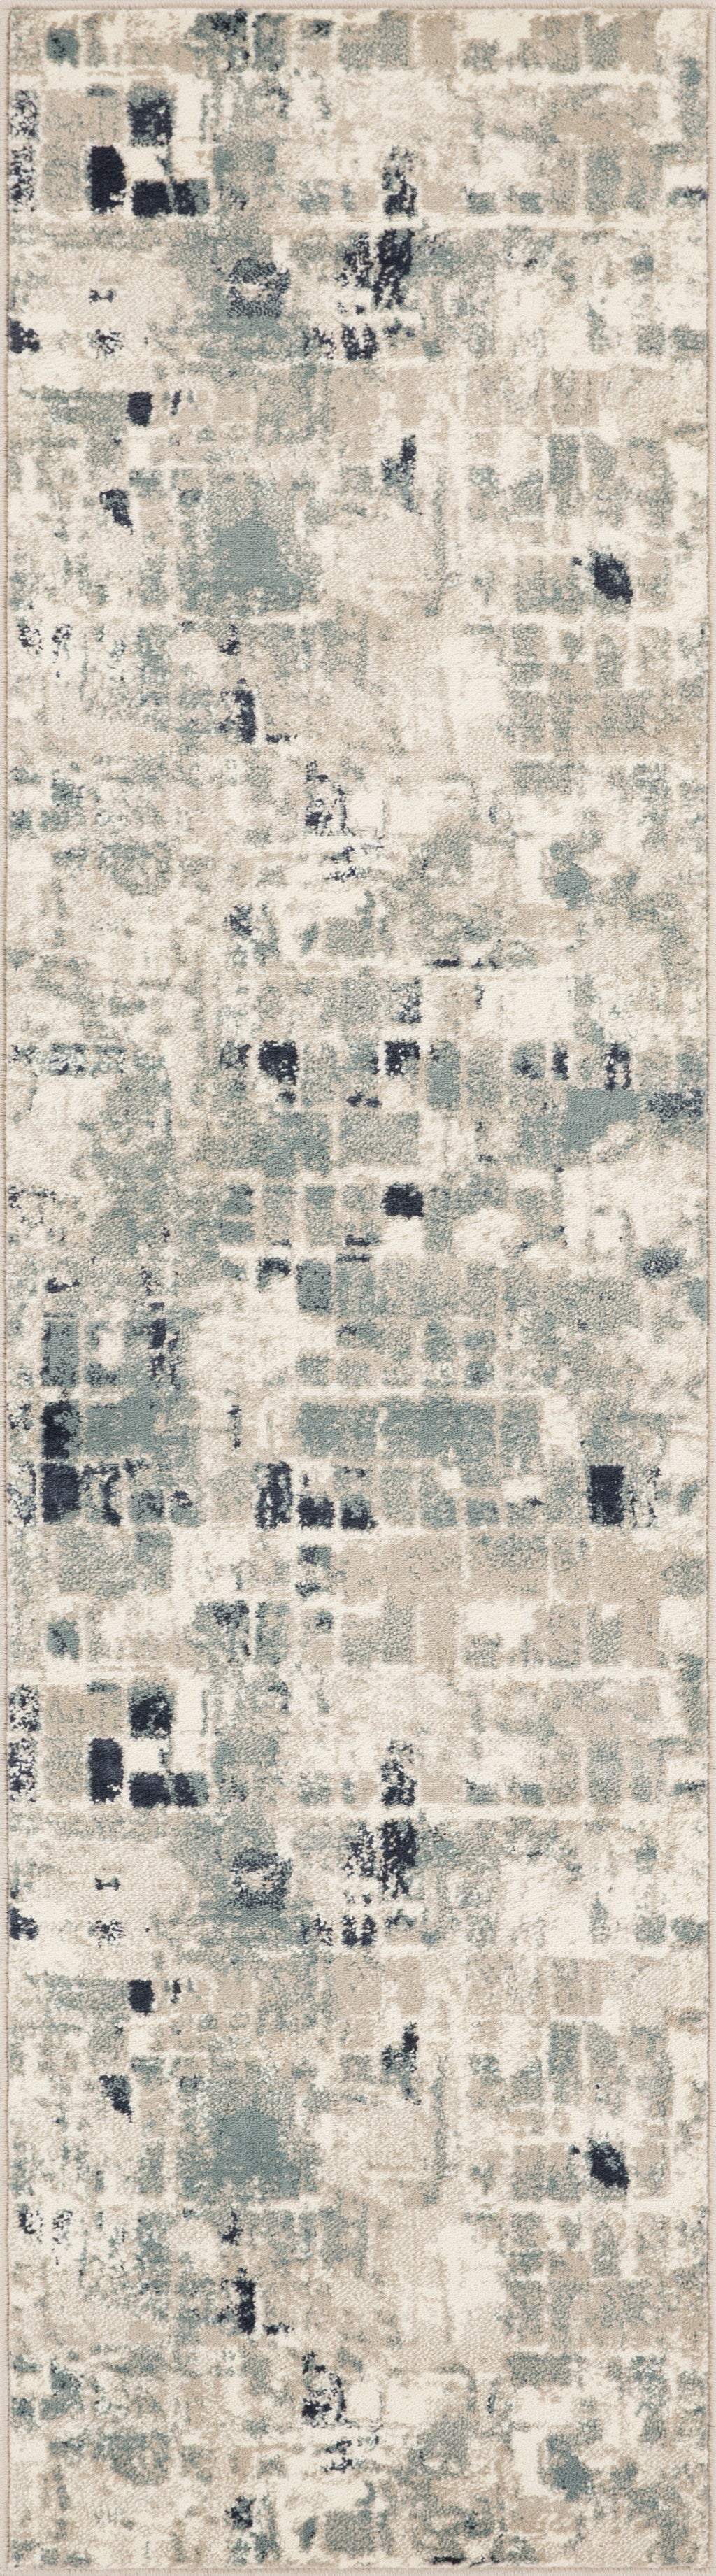 2’ x 8’ Beige Blue Abstract Tiles Distressed Runner Rug